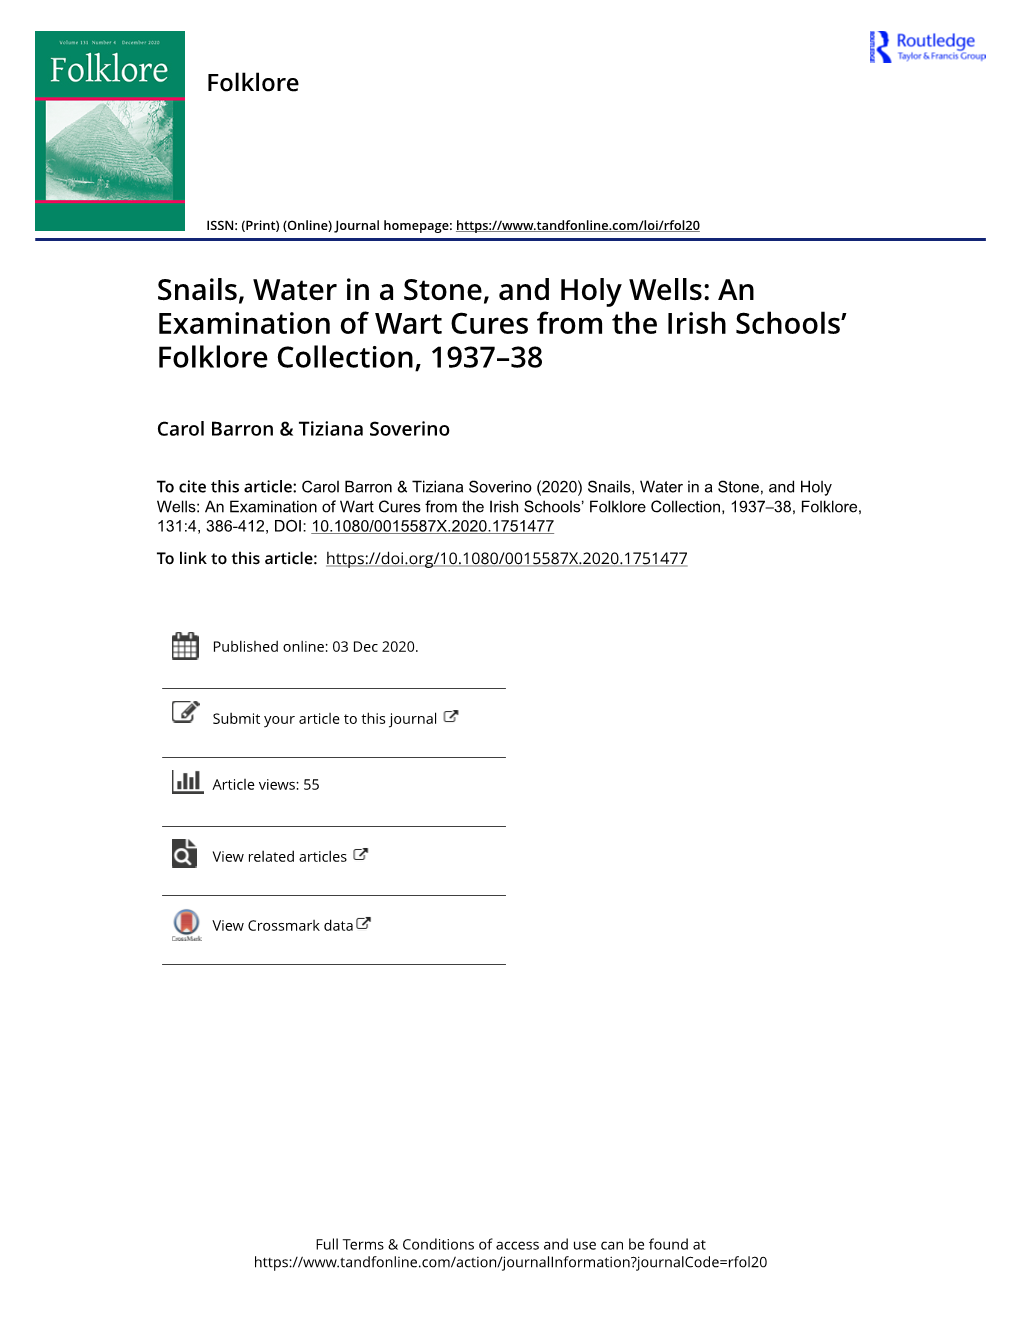 Snails, Water in a Stone, and Holy Wells: an Examination of Wart Cures from the Irish Schools' Folkl